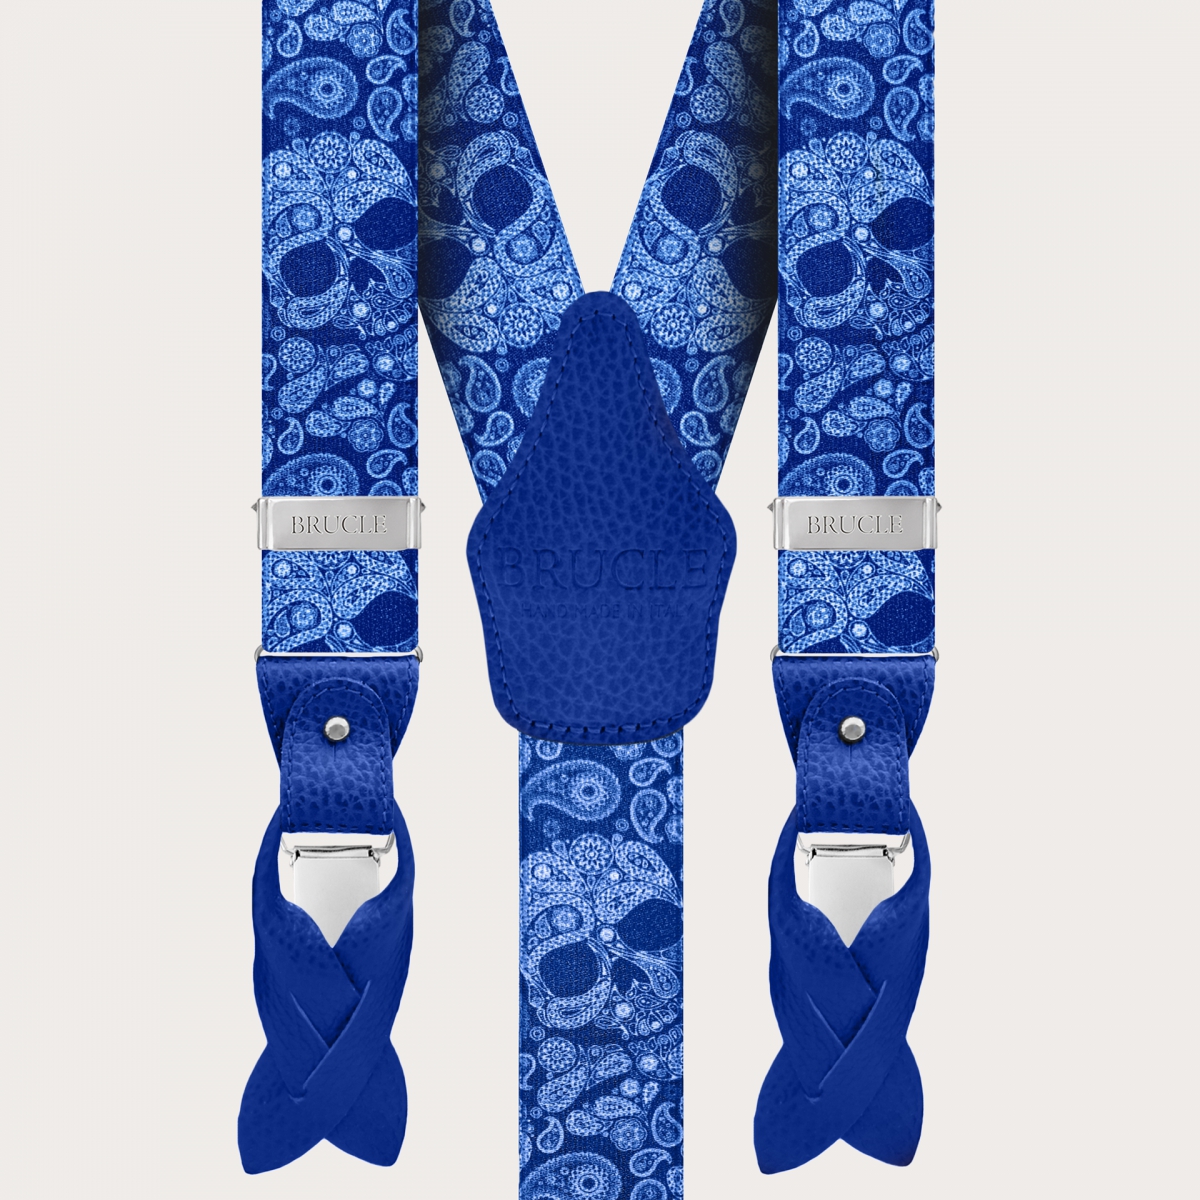 BRUCLE Blue double-use braces with blue skulls pattern